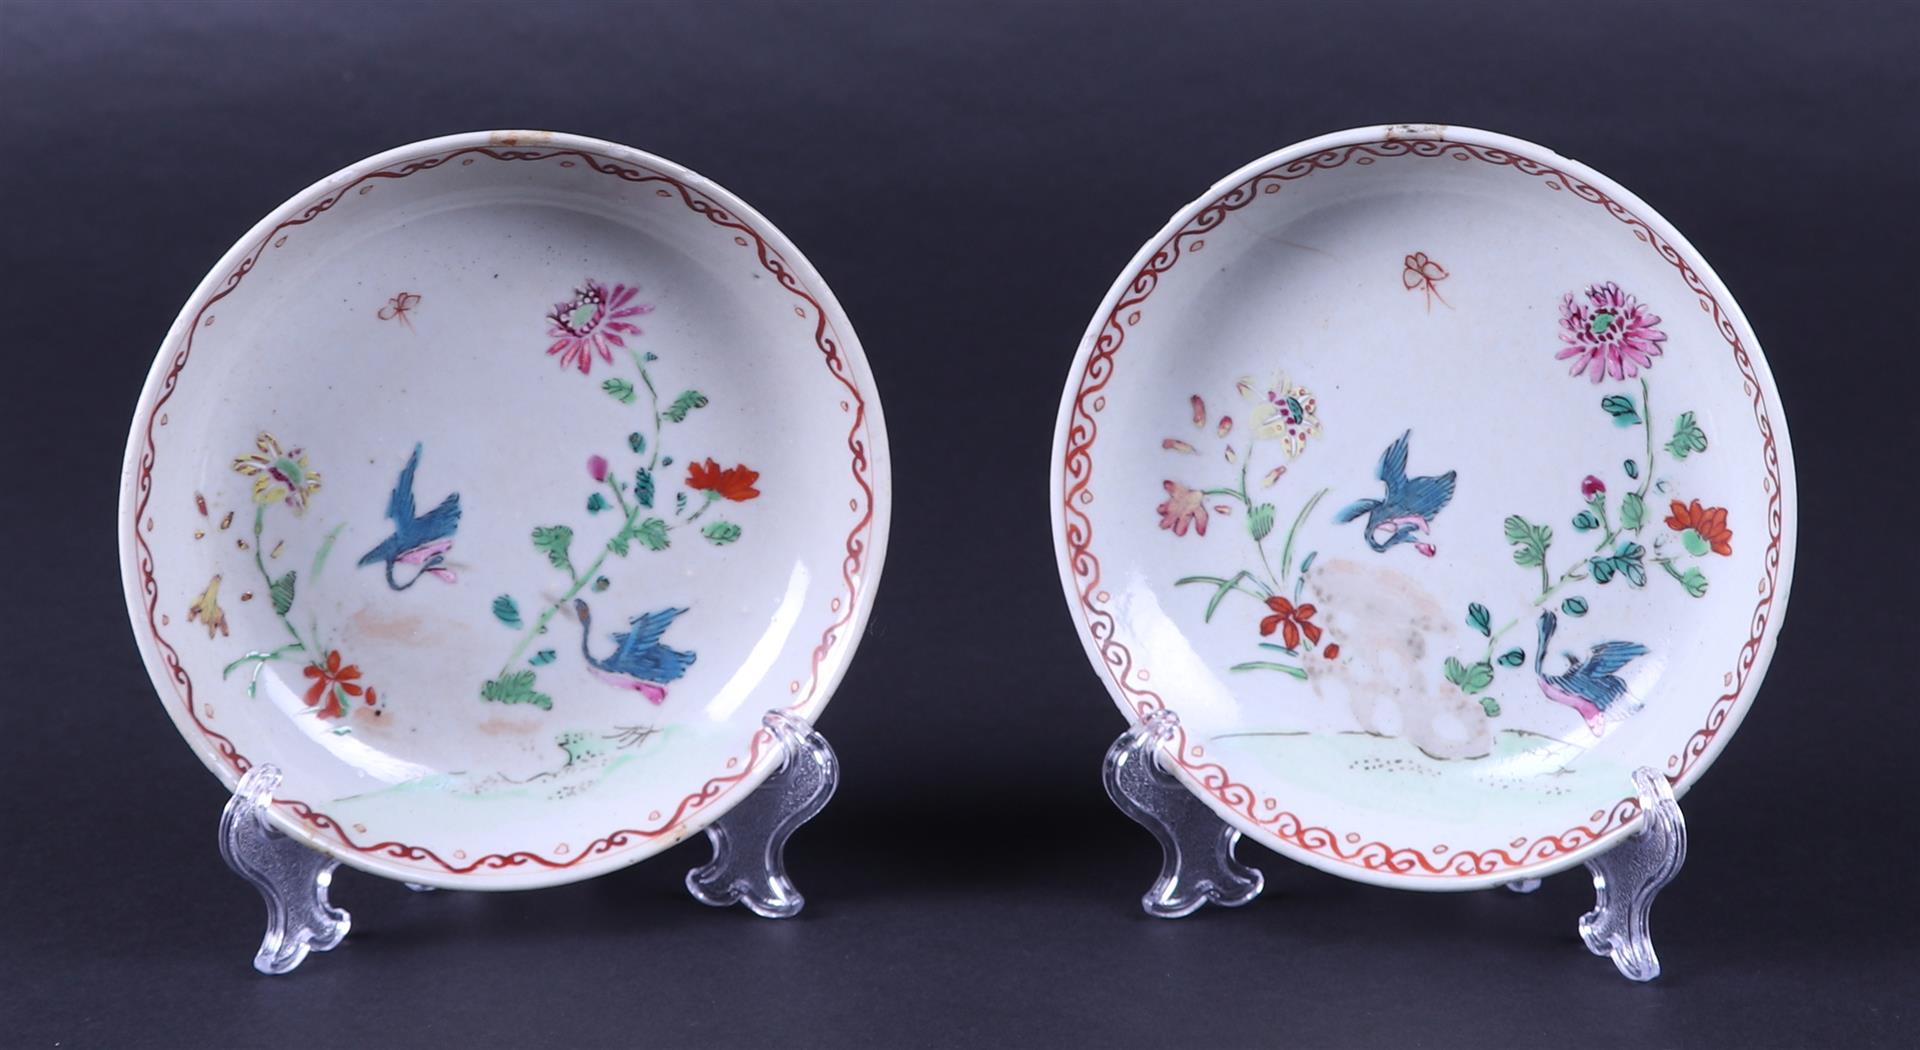 A set of two famille rose dishes with a decor of birds and flowers. China, 18th century.
